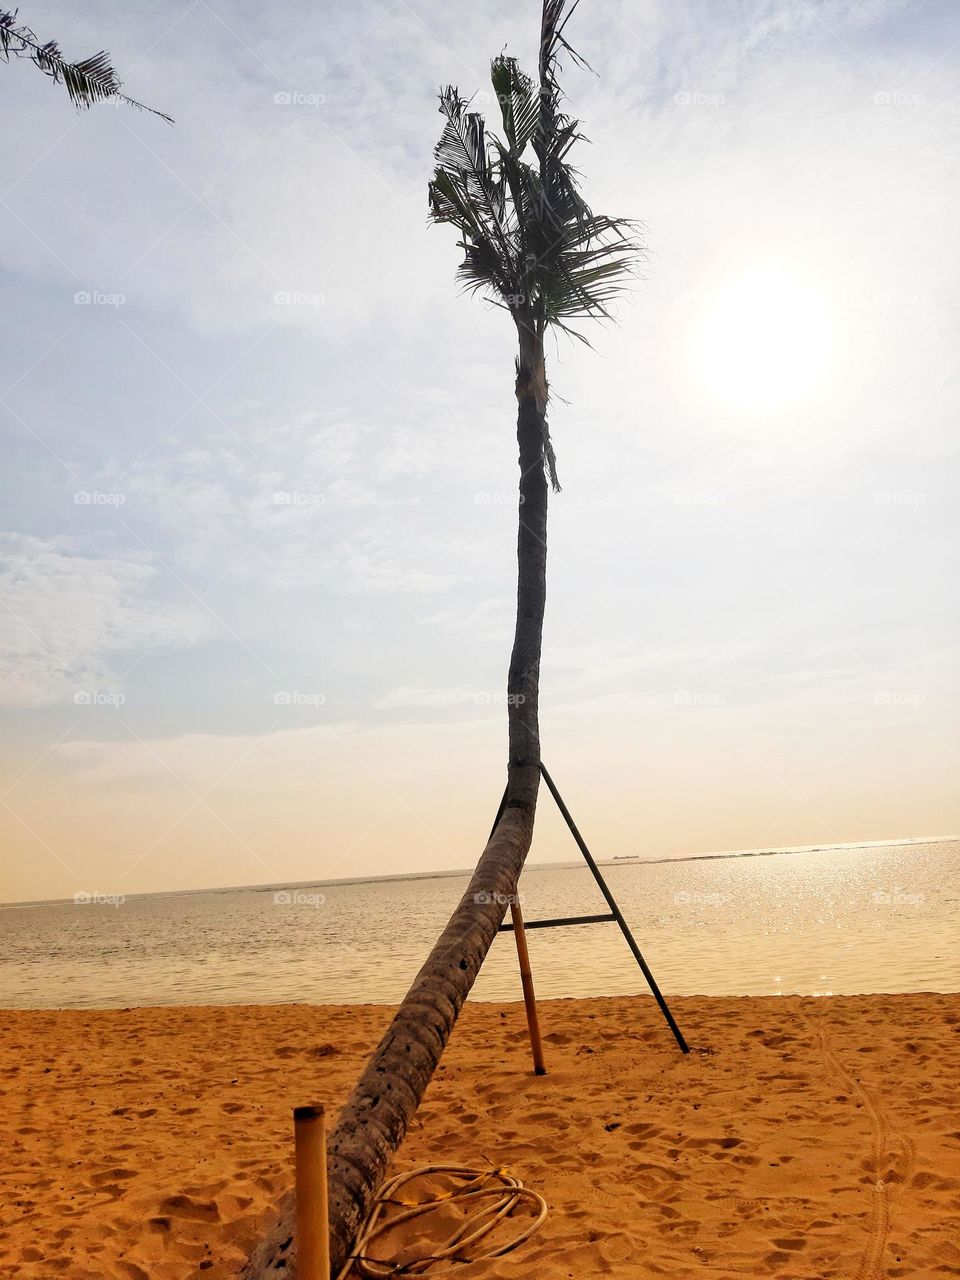 a tall unstraight coconut tree found on the sandy beacg